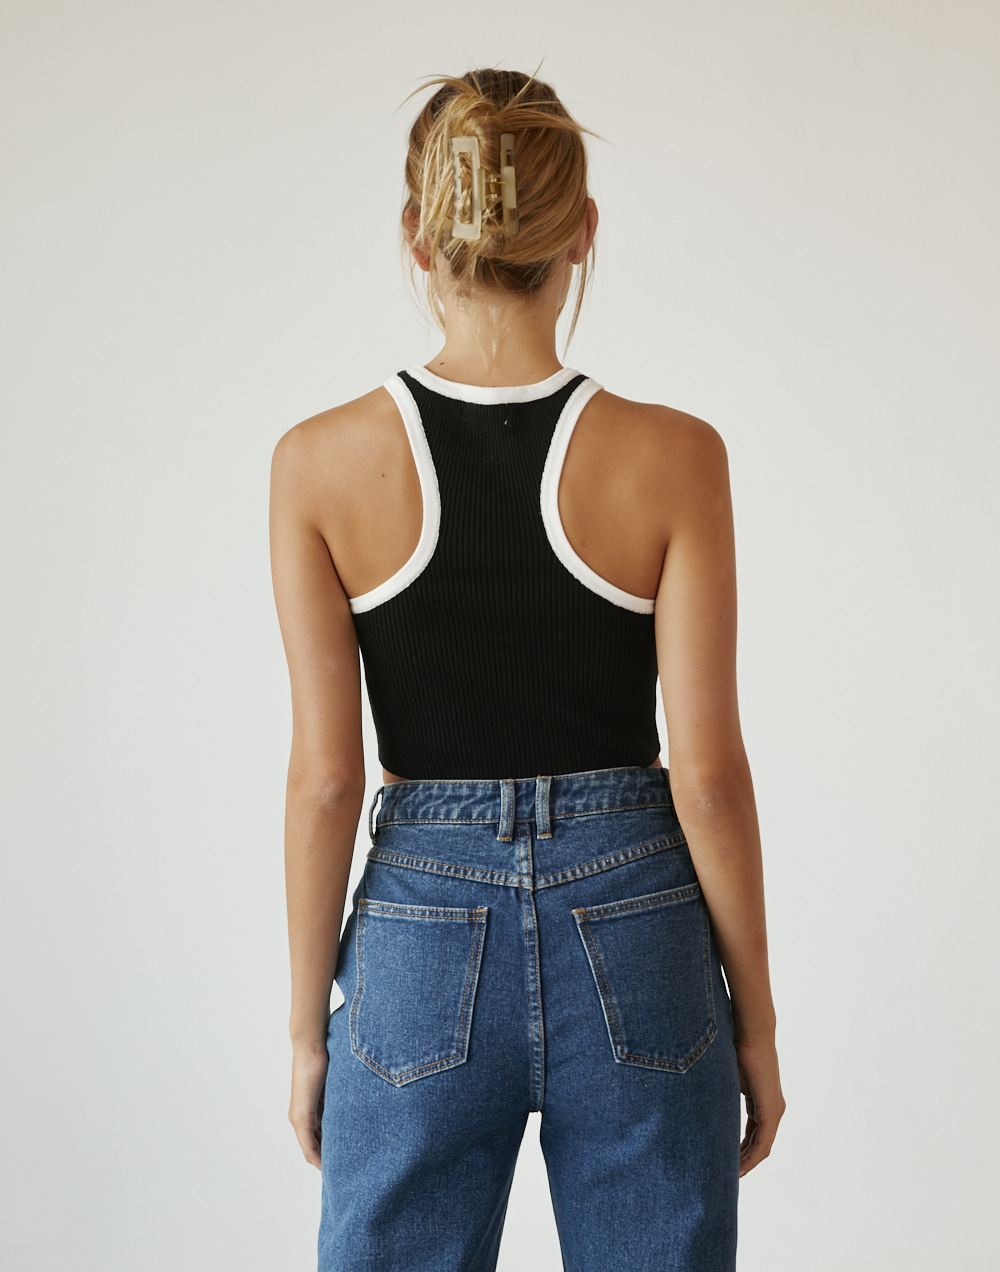 Laylani Knit Crop Top (Black/White) - Knitted Tank Top - Women's Top - Charcoal Clothing